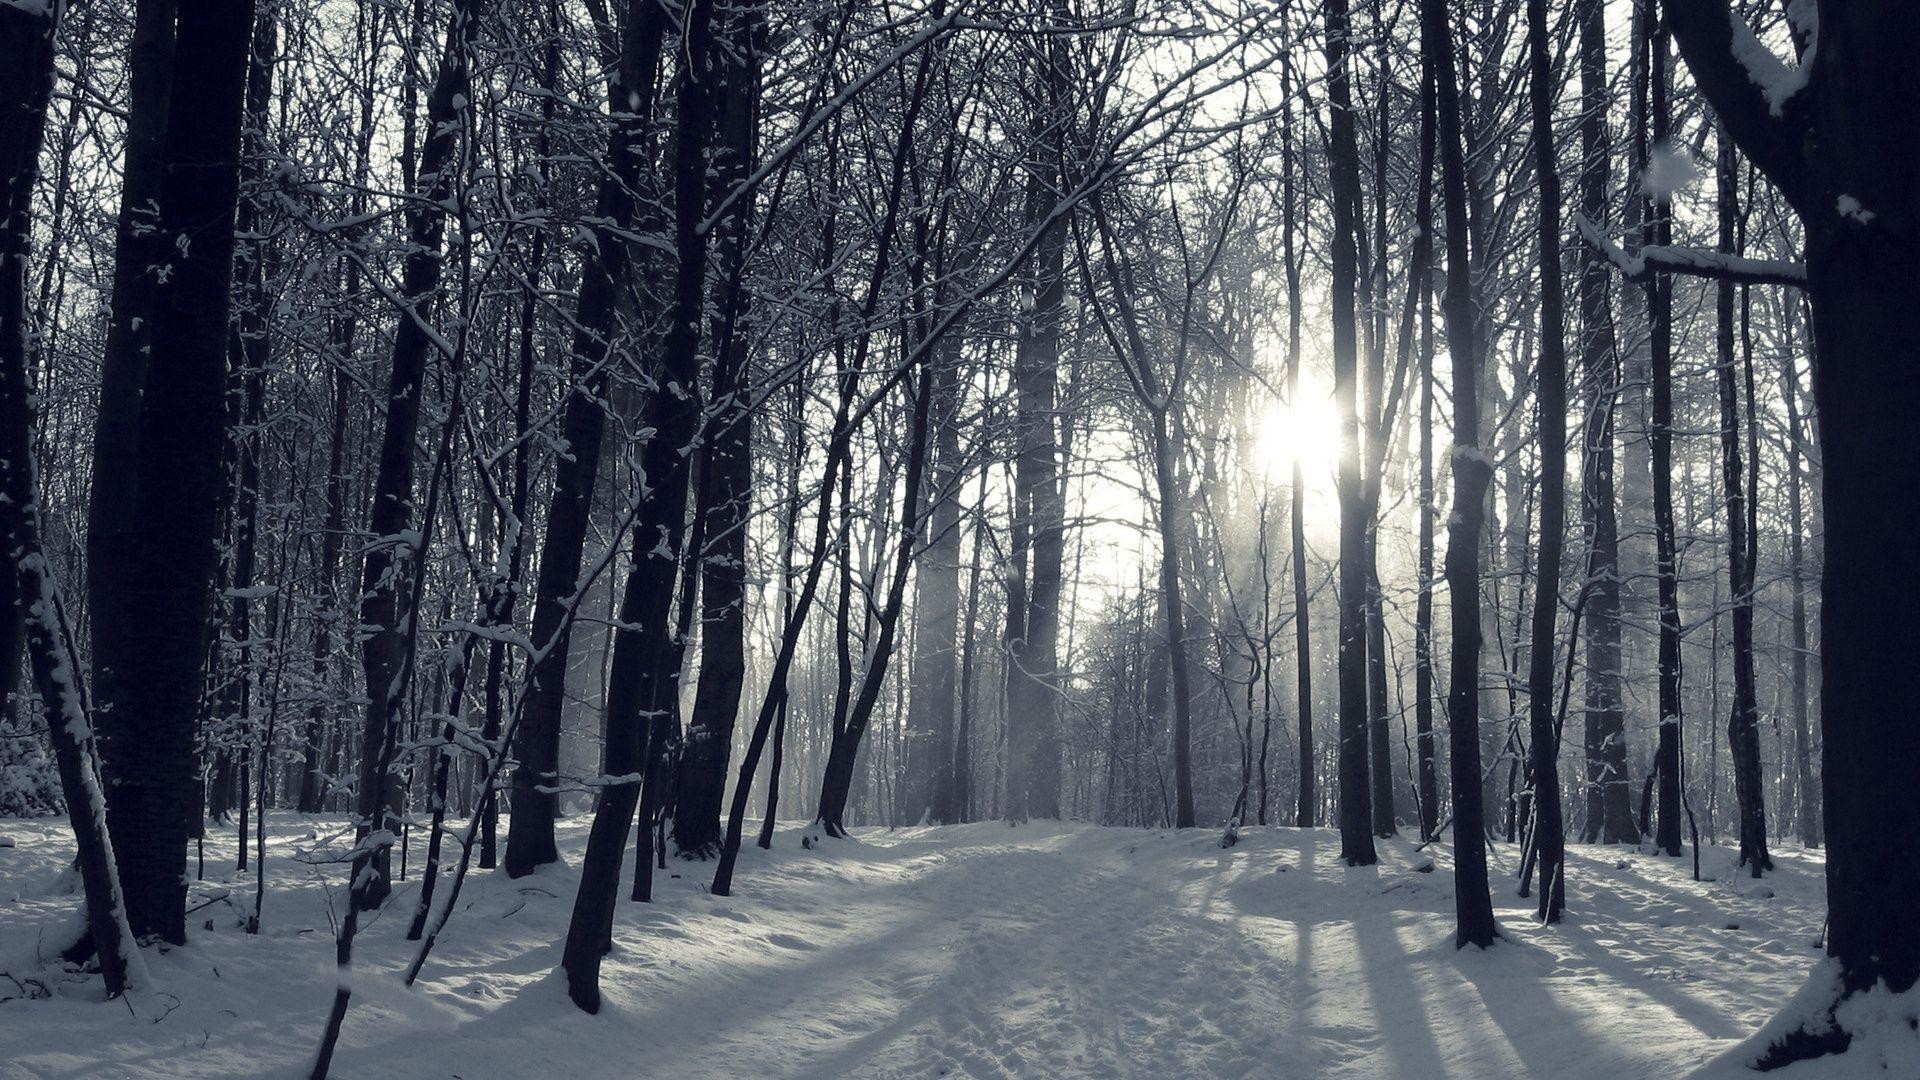 1920x1080 ... Wallpaper Weekends: Stopping by the Snowy Woods for iPhone, iPad .